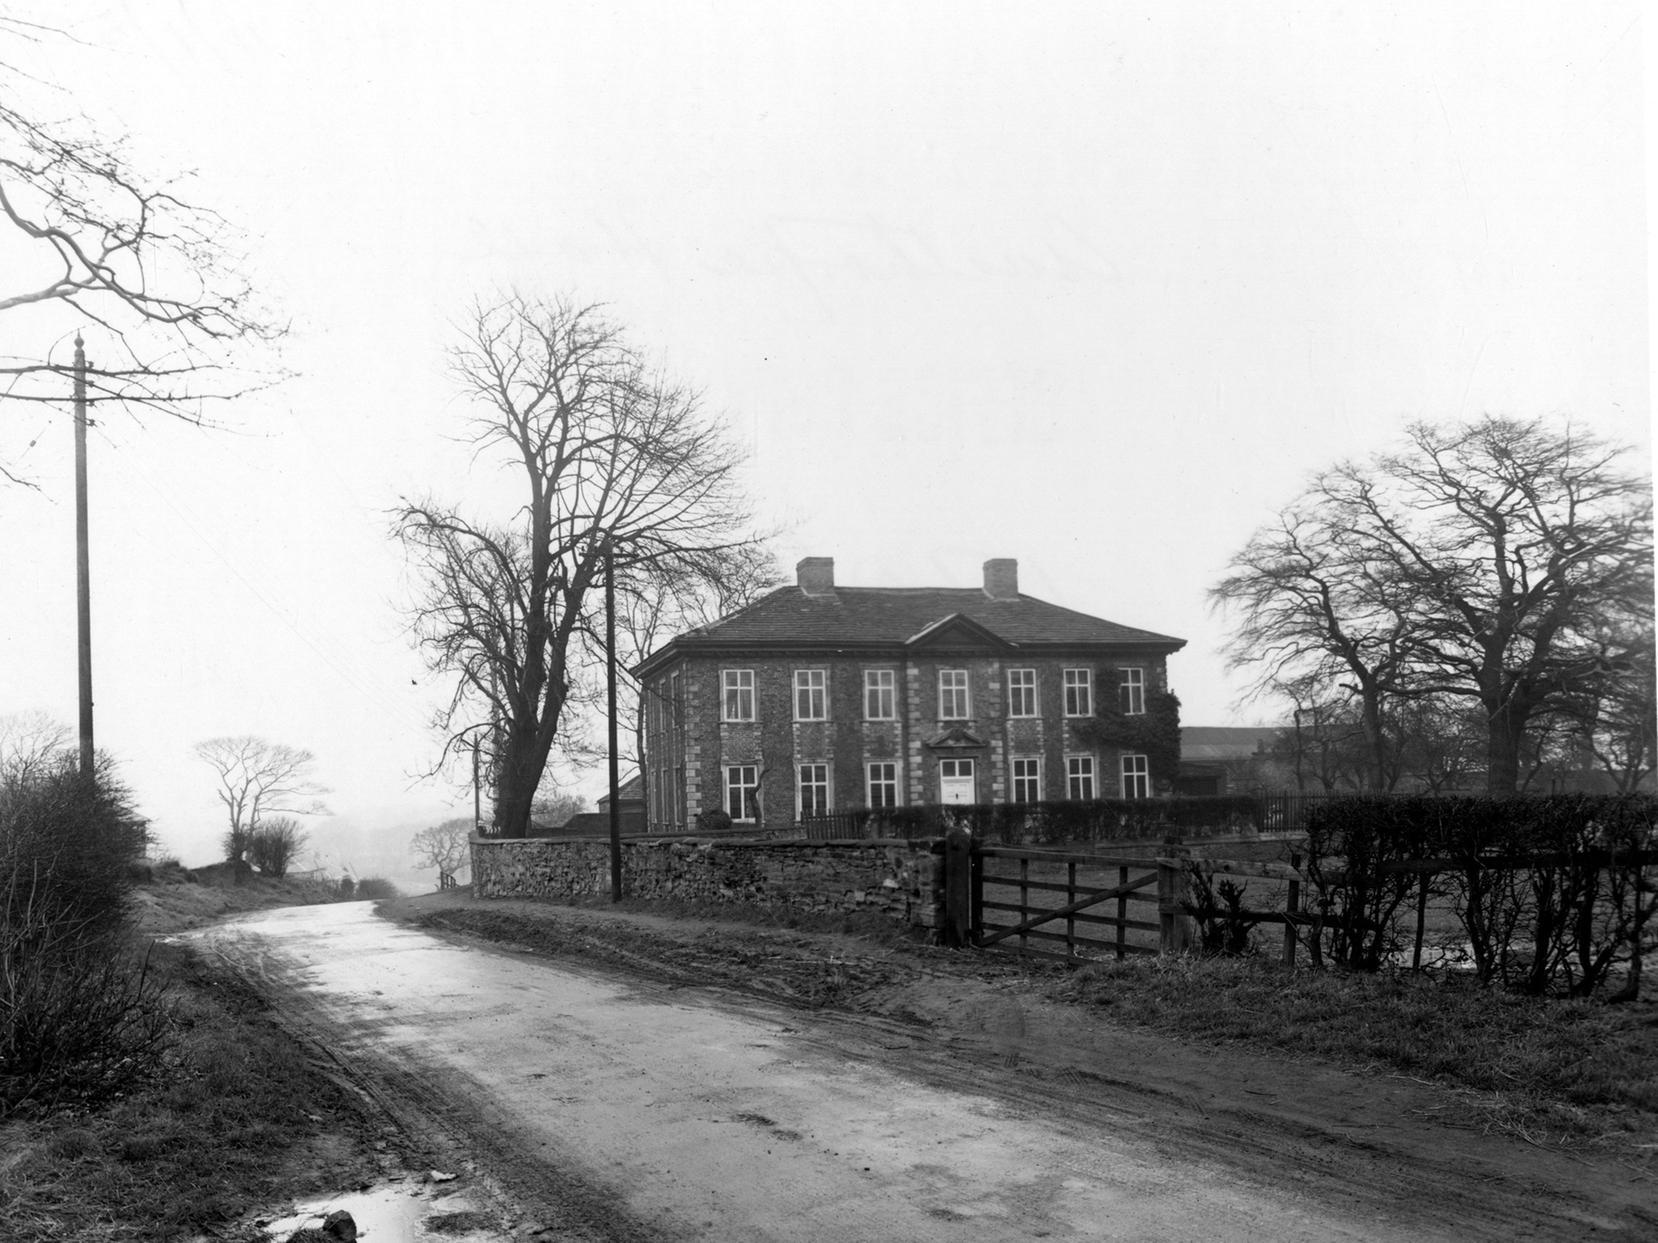 Austhorpe Hall from muddy road across a field towards the house. The left hand side of the road was shortly to be developed into a row of semi-detached houses.